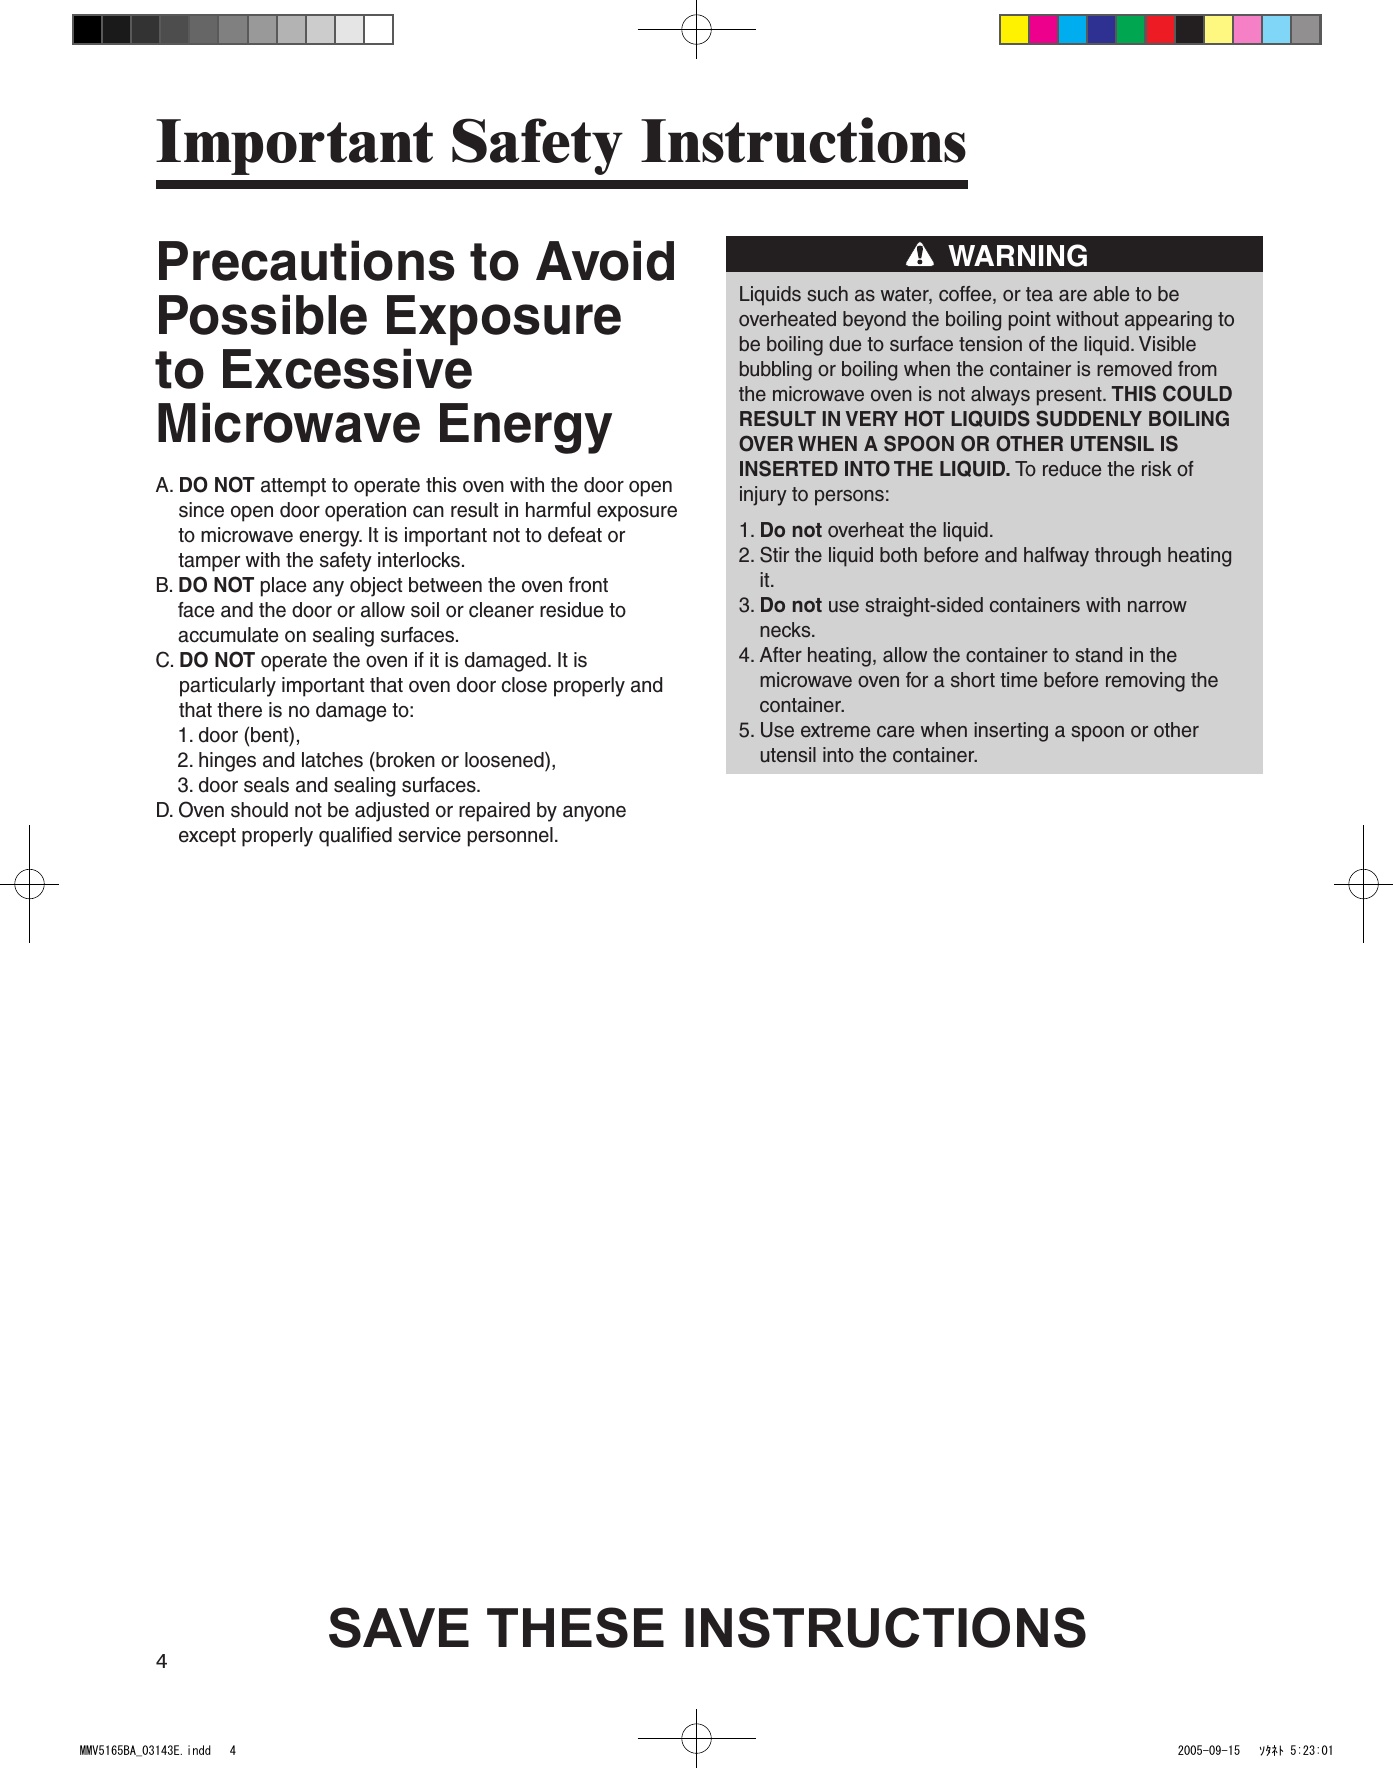 4Precautions to Avoid Possible Exposure to Excessive Microwave EnergyA.  DO NOT attempt to operate this oven with the door open since open door operation can result in harmful exposure to microwave energy. It is important not to defeat or tamper with the safety interlocks.B.  DO NOT place any object between the oven front face and the door or allow soil or cleaner residue to accumulate on sealing surfaces.C.  DO NOT operate the oven if it is damaged. It is particularly important that oven door close properly and that there is no damage to:    1. door (bent),    2. hinges and latches (broken or loosened),    3. door seals and sealing surfaces.D.  Oven should not be adjusted or repaired by anyone except properly qualified service personnel.WARNINGLiquids such as water, coffee, or tea are able to beoverheated beyond the boiling point without appearing tobe boiling due to surface tension of the liquid. Visiblebubbling or boiling when the container is removed fromthe microwave oven is not always present. THIS COULDRESULT IN VERY HOT LIQUIDS SUDDENLY BOILINGOVER WHEN A SPOON OR OTHER UTENSIL ISINSERTED INTO THE LIQUID. To reduce the risk ofinjury to persons:1. Do not overheat the liquid.2.  Stir the liquid both before and halfway through heating it.3.  Do not use straight-sided containers with narrow necks.4.  After heating, allow the container to stand in the microwave oven for a short time before removing the container.5.  Use extreme care when inserting a spoon or other utensil into the container.Important Safety InstructionsSAVE THESE INSTRUCTIONSMMV5165BA_03143E.indd   4 2005-09-15   ｿﾀﾈﾄ 5:23:01